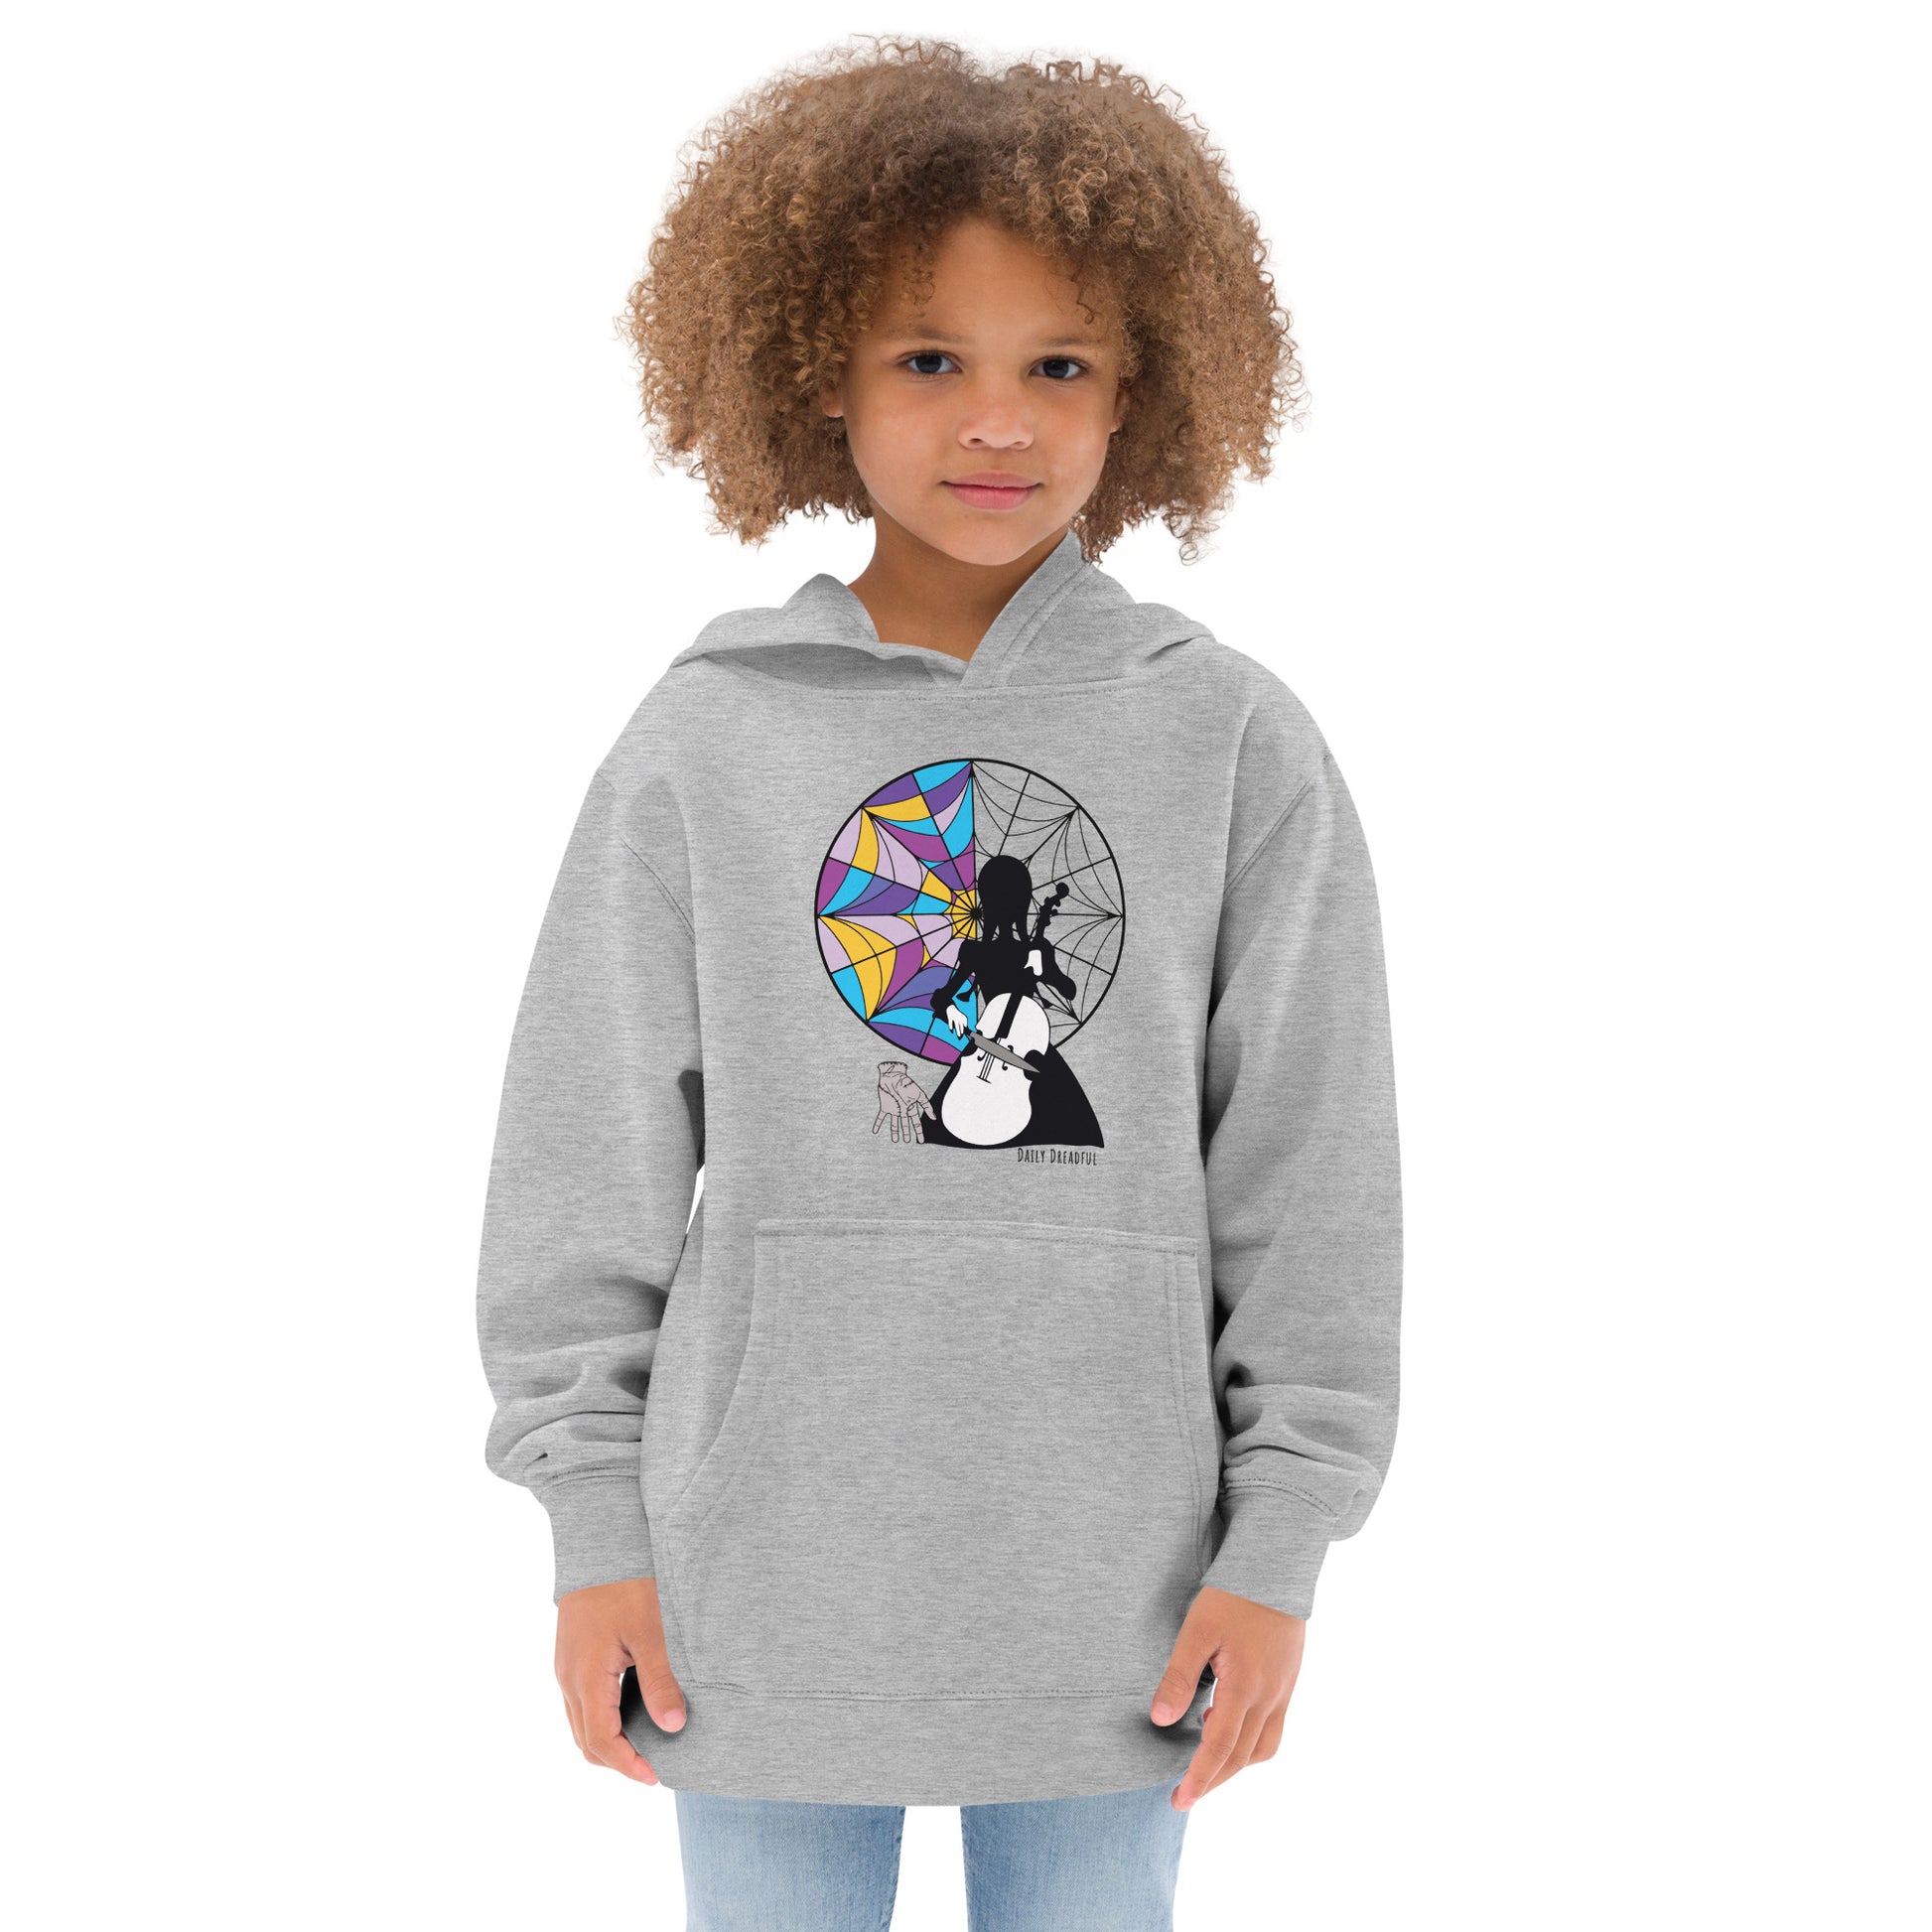 athletic heather "Wednesday Addams Cello" Kids fleece hoodie from Daily Dreadful